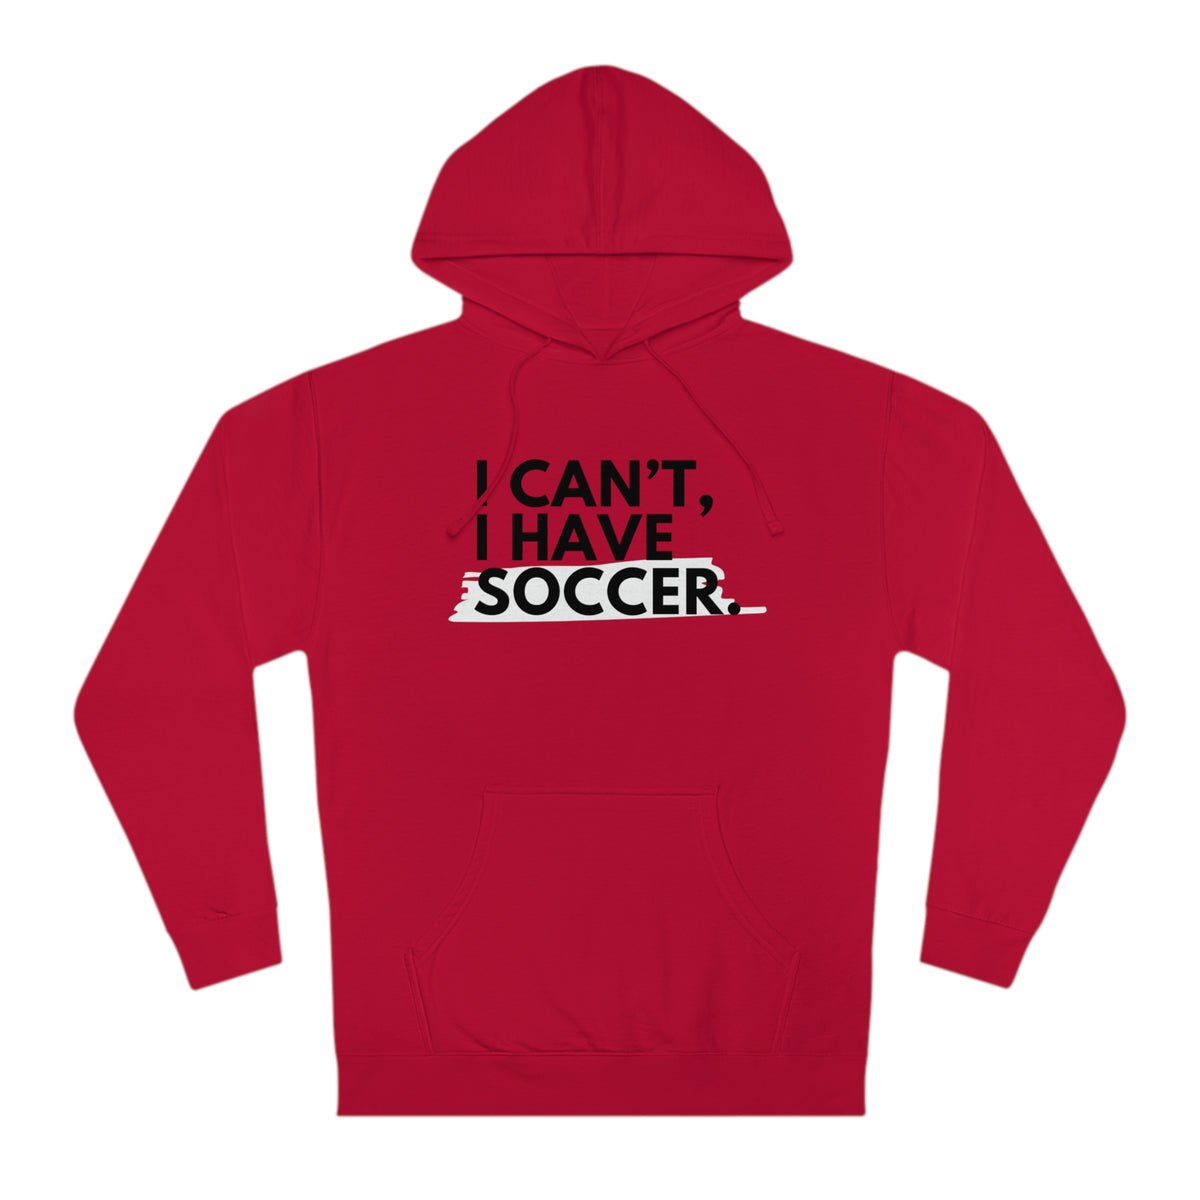 I Can't I Have Soccer Adult Hooded Sweatshirt